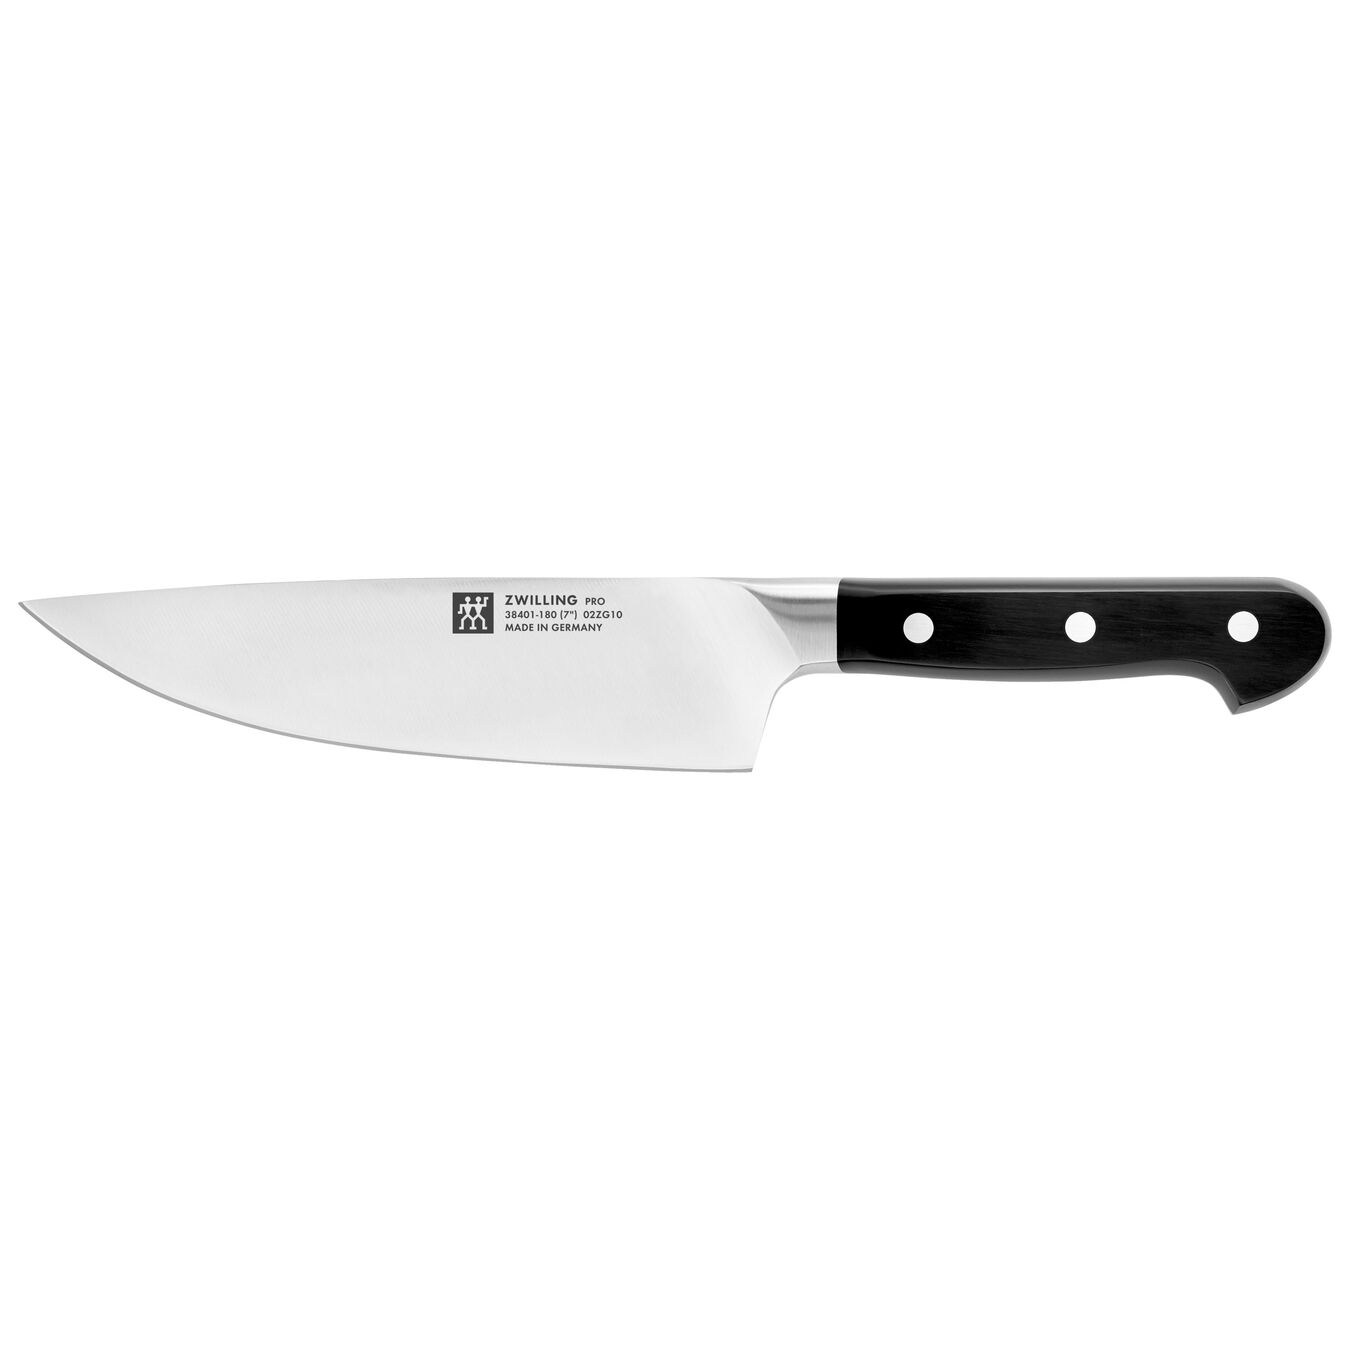 ZWILLING Pro 7-inch, Chef's knife | Official ZWILLING Shop